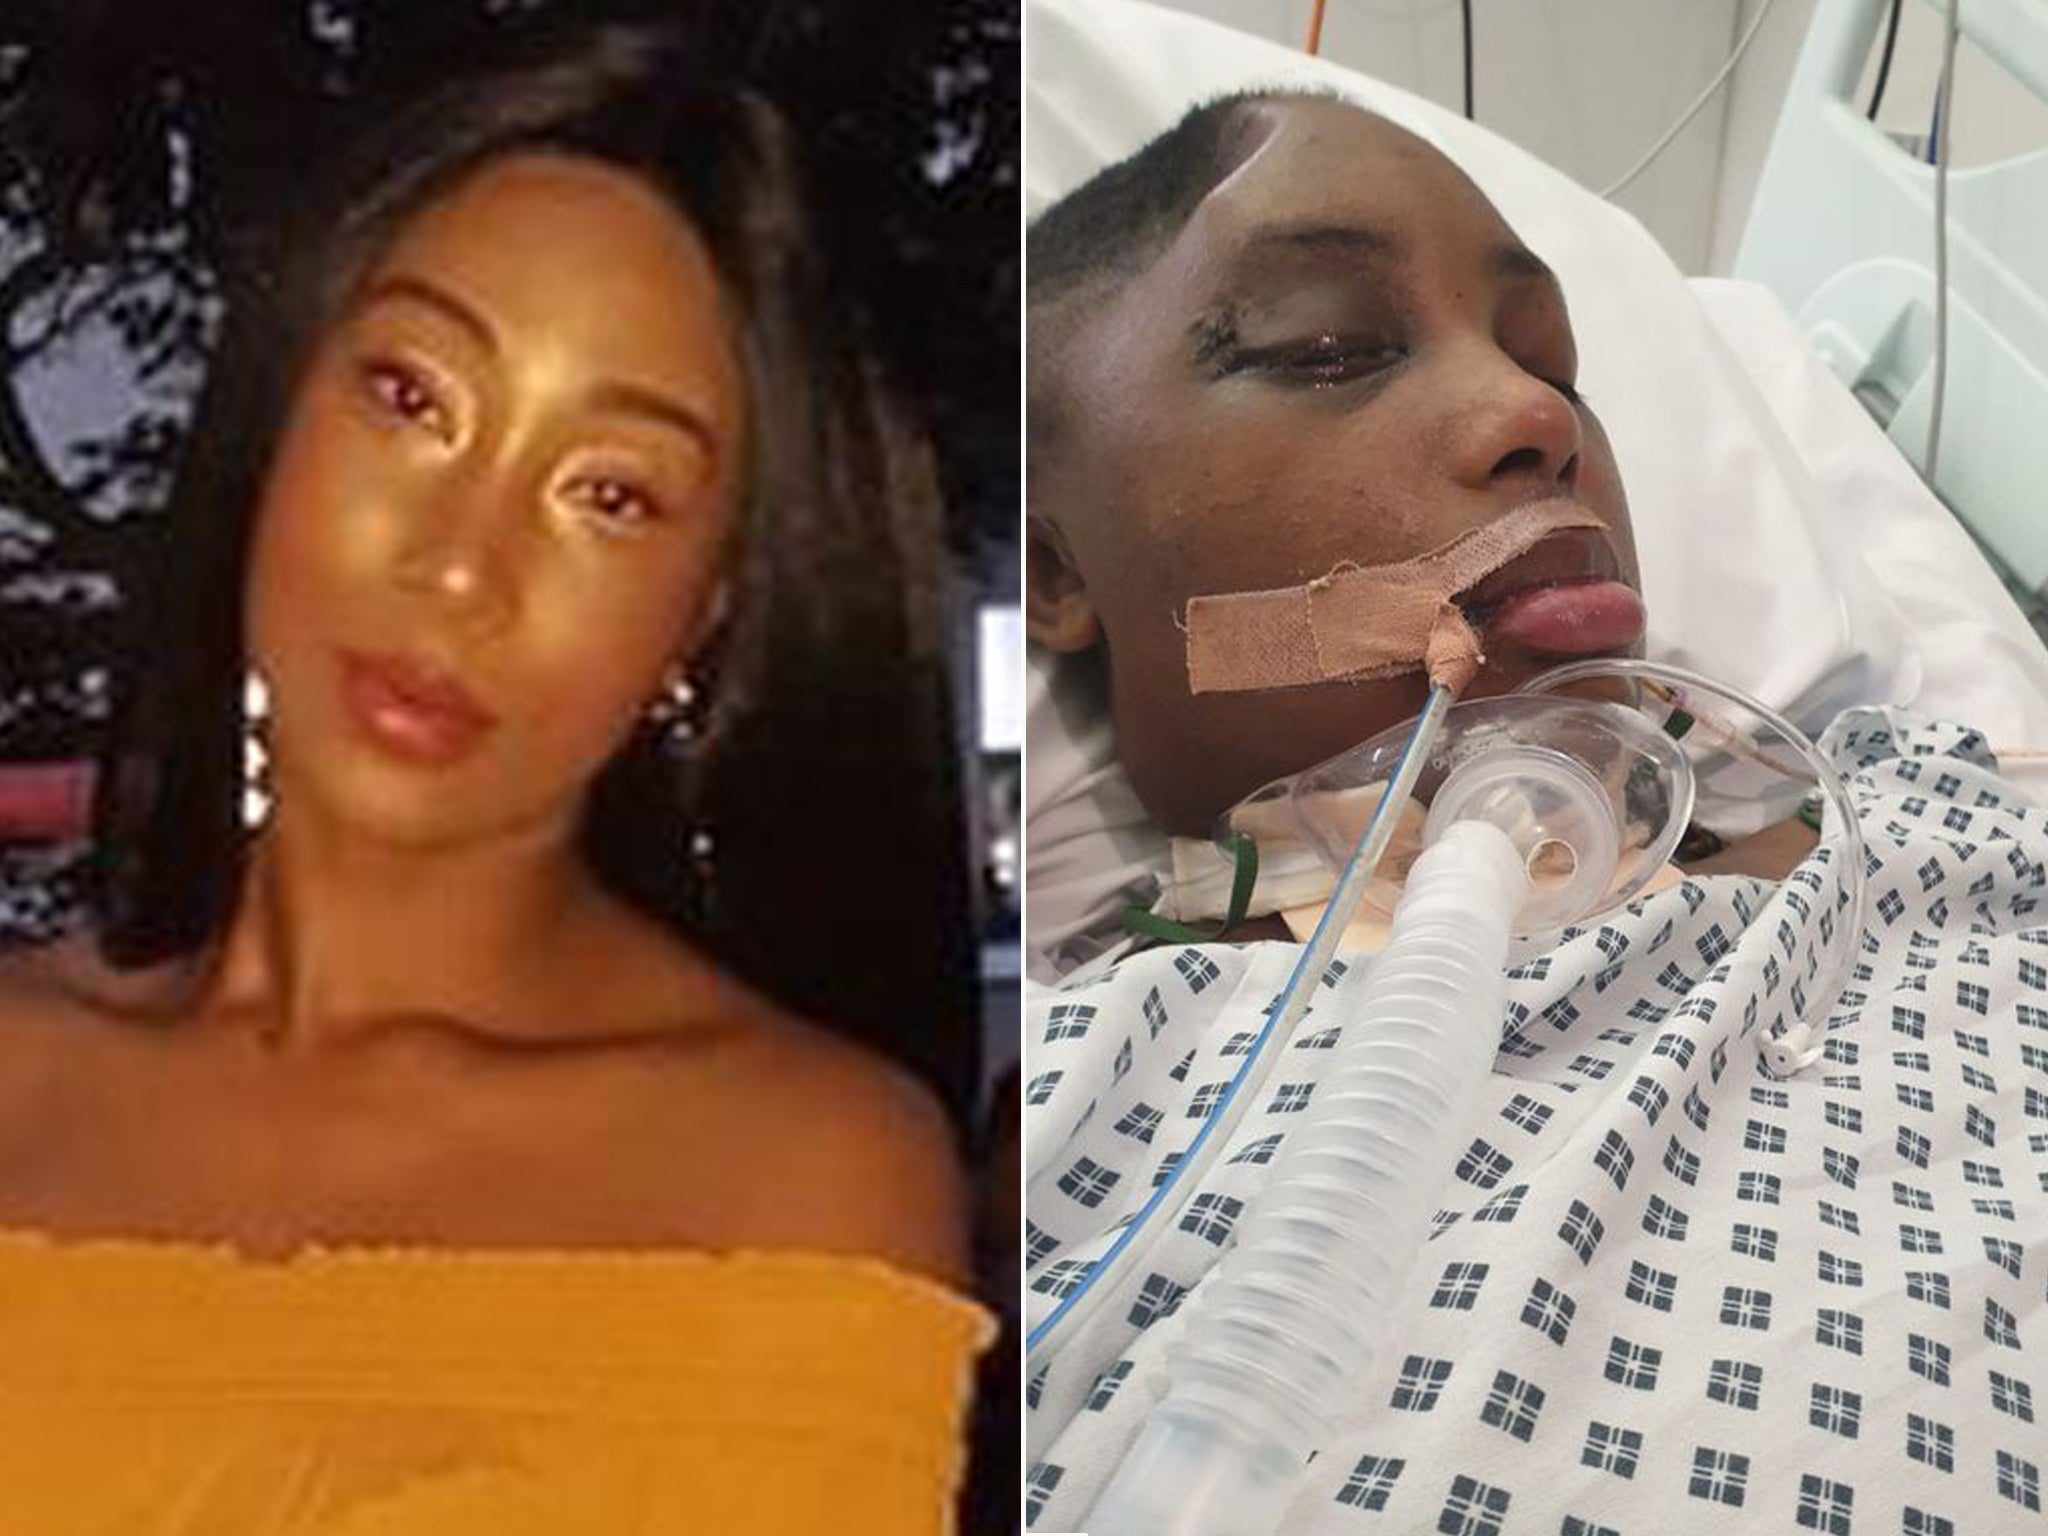 Sasha Johnson was injured when masked people stormed into a party in Peckham last year